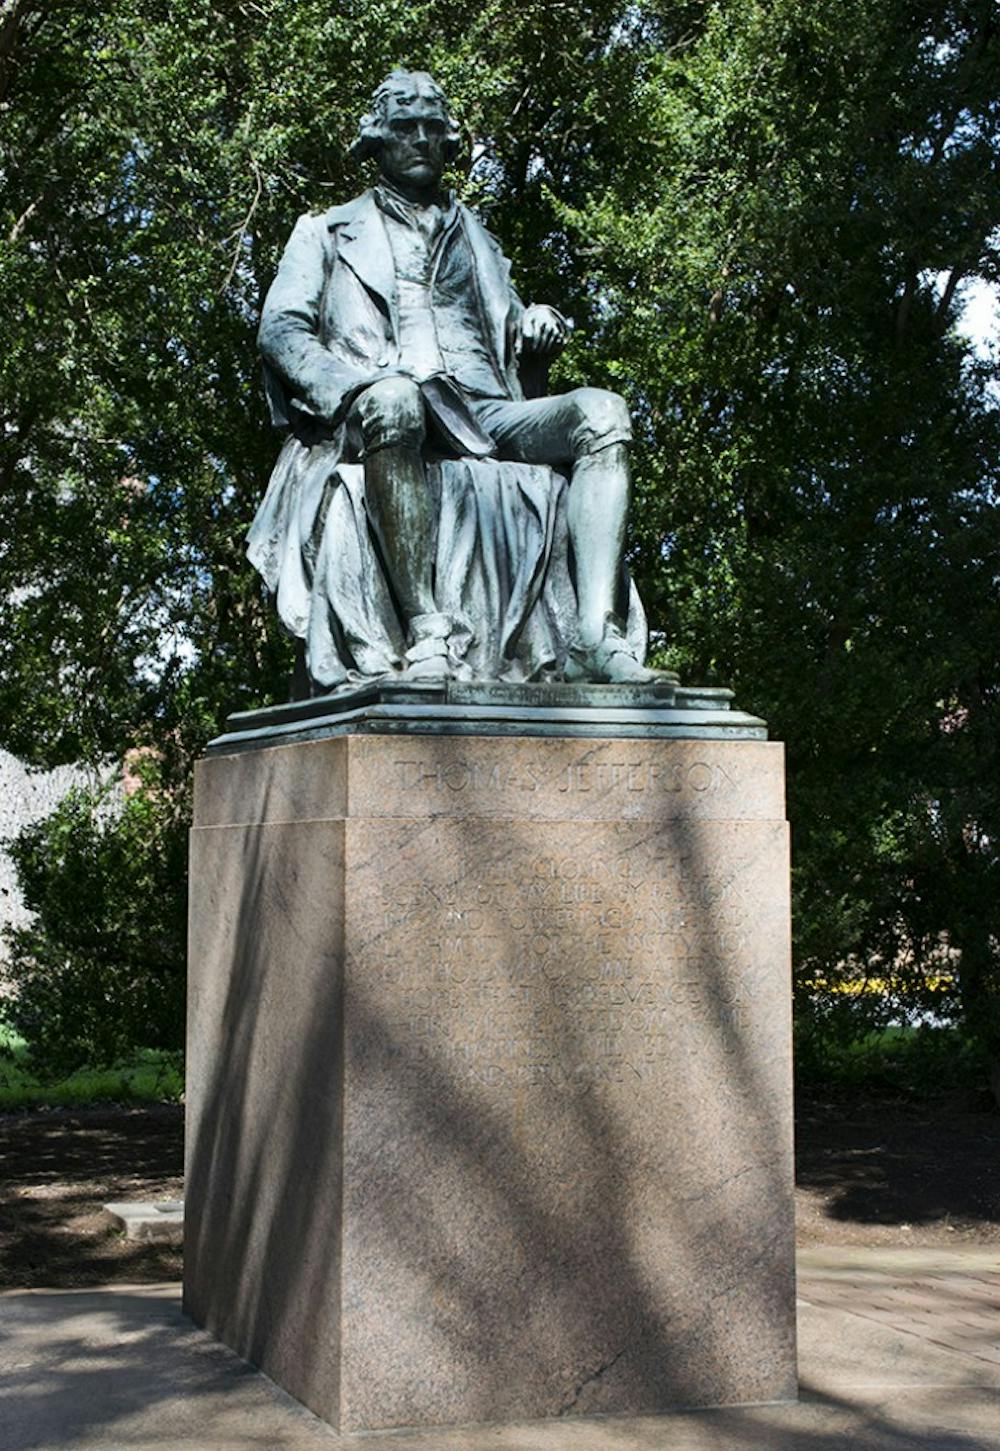 <p>Students encounter representations of the University's founder everyday, whether it be walking past statues modeled after Jefferson or hearing his name mentioned in a class.</p>